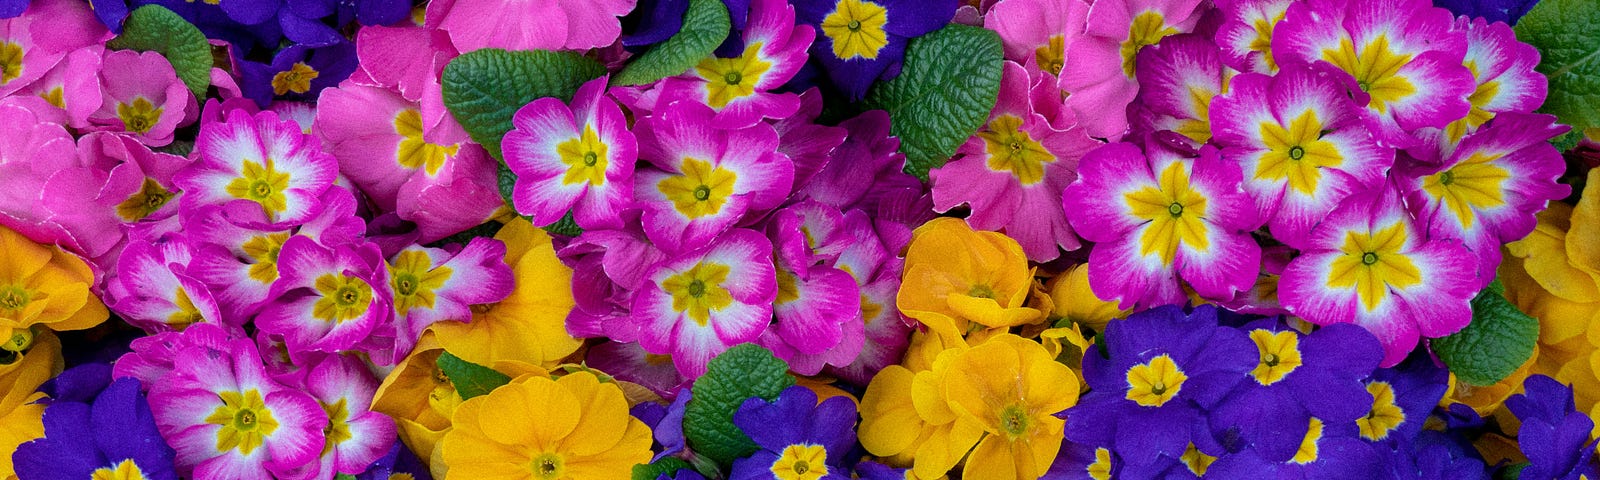 A beautiful image of blue, yellow and pink pansies in the midst of short green leaves.